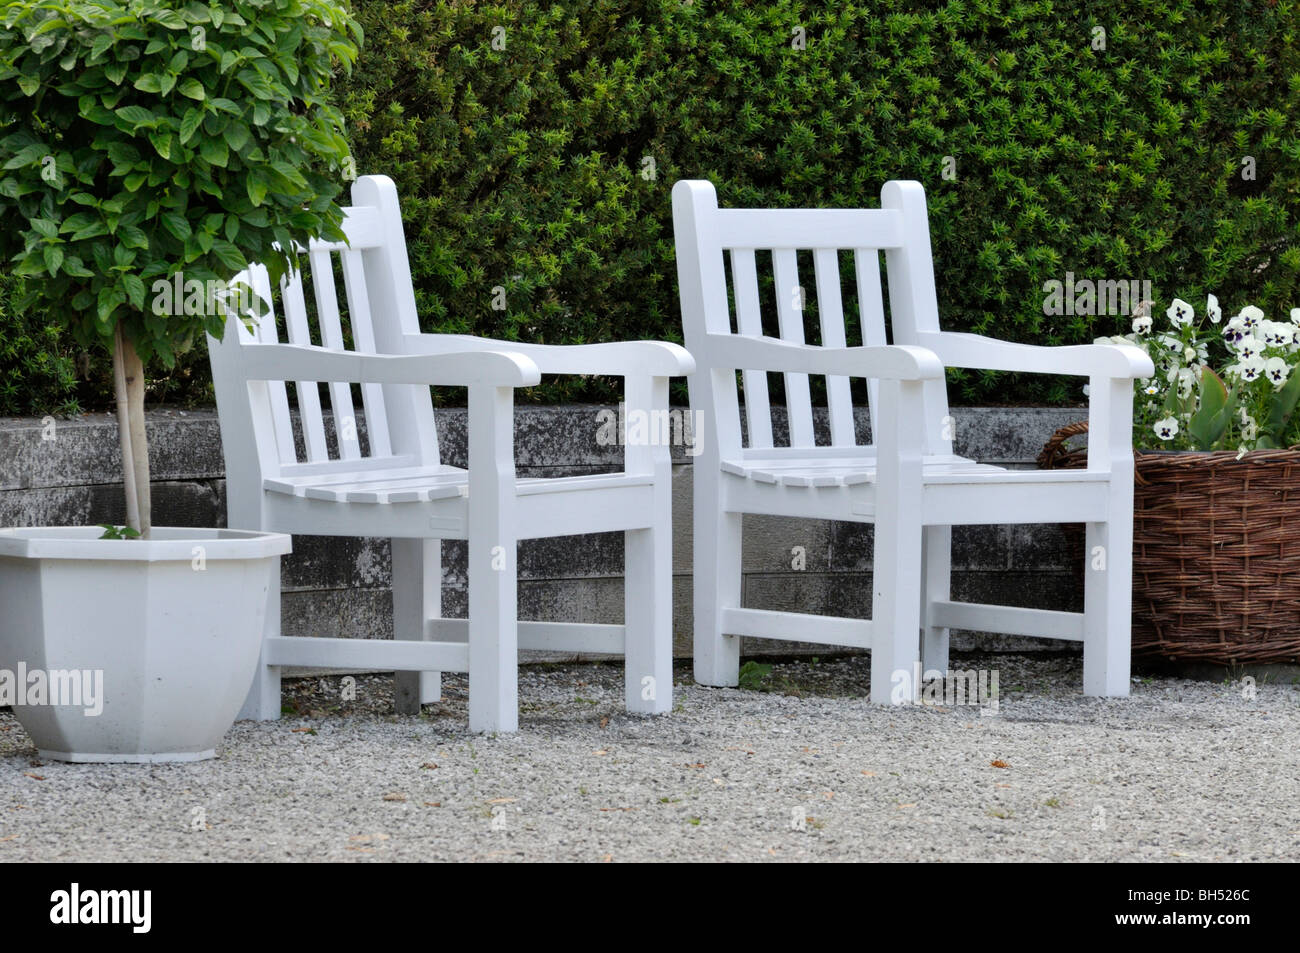 Garden chairs with potted plants Stock Photo